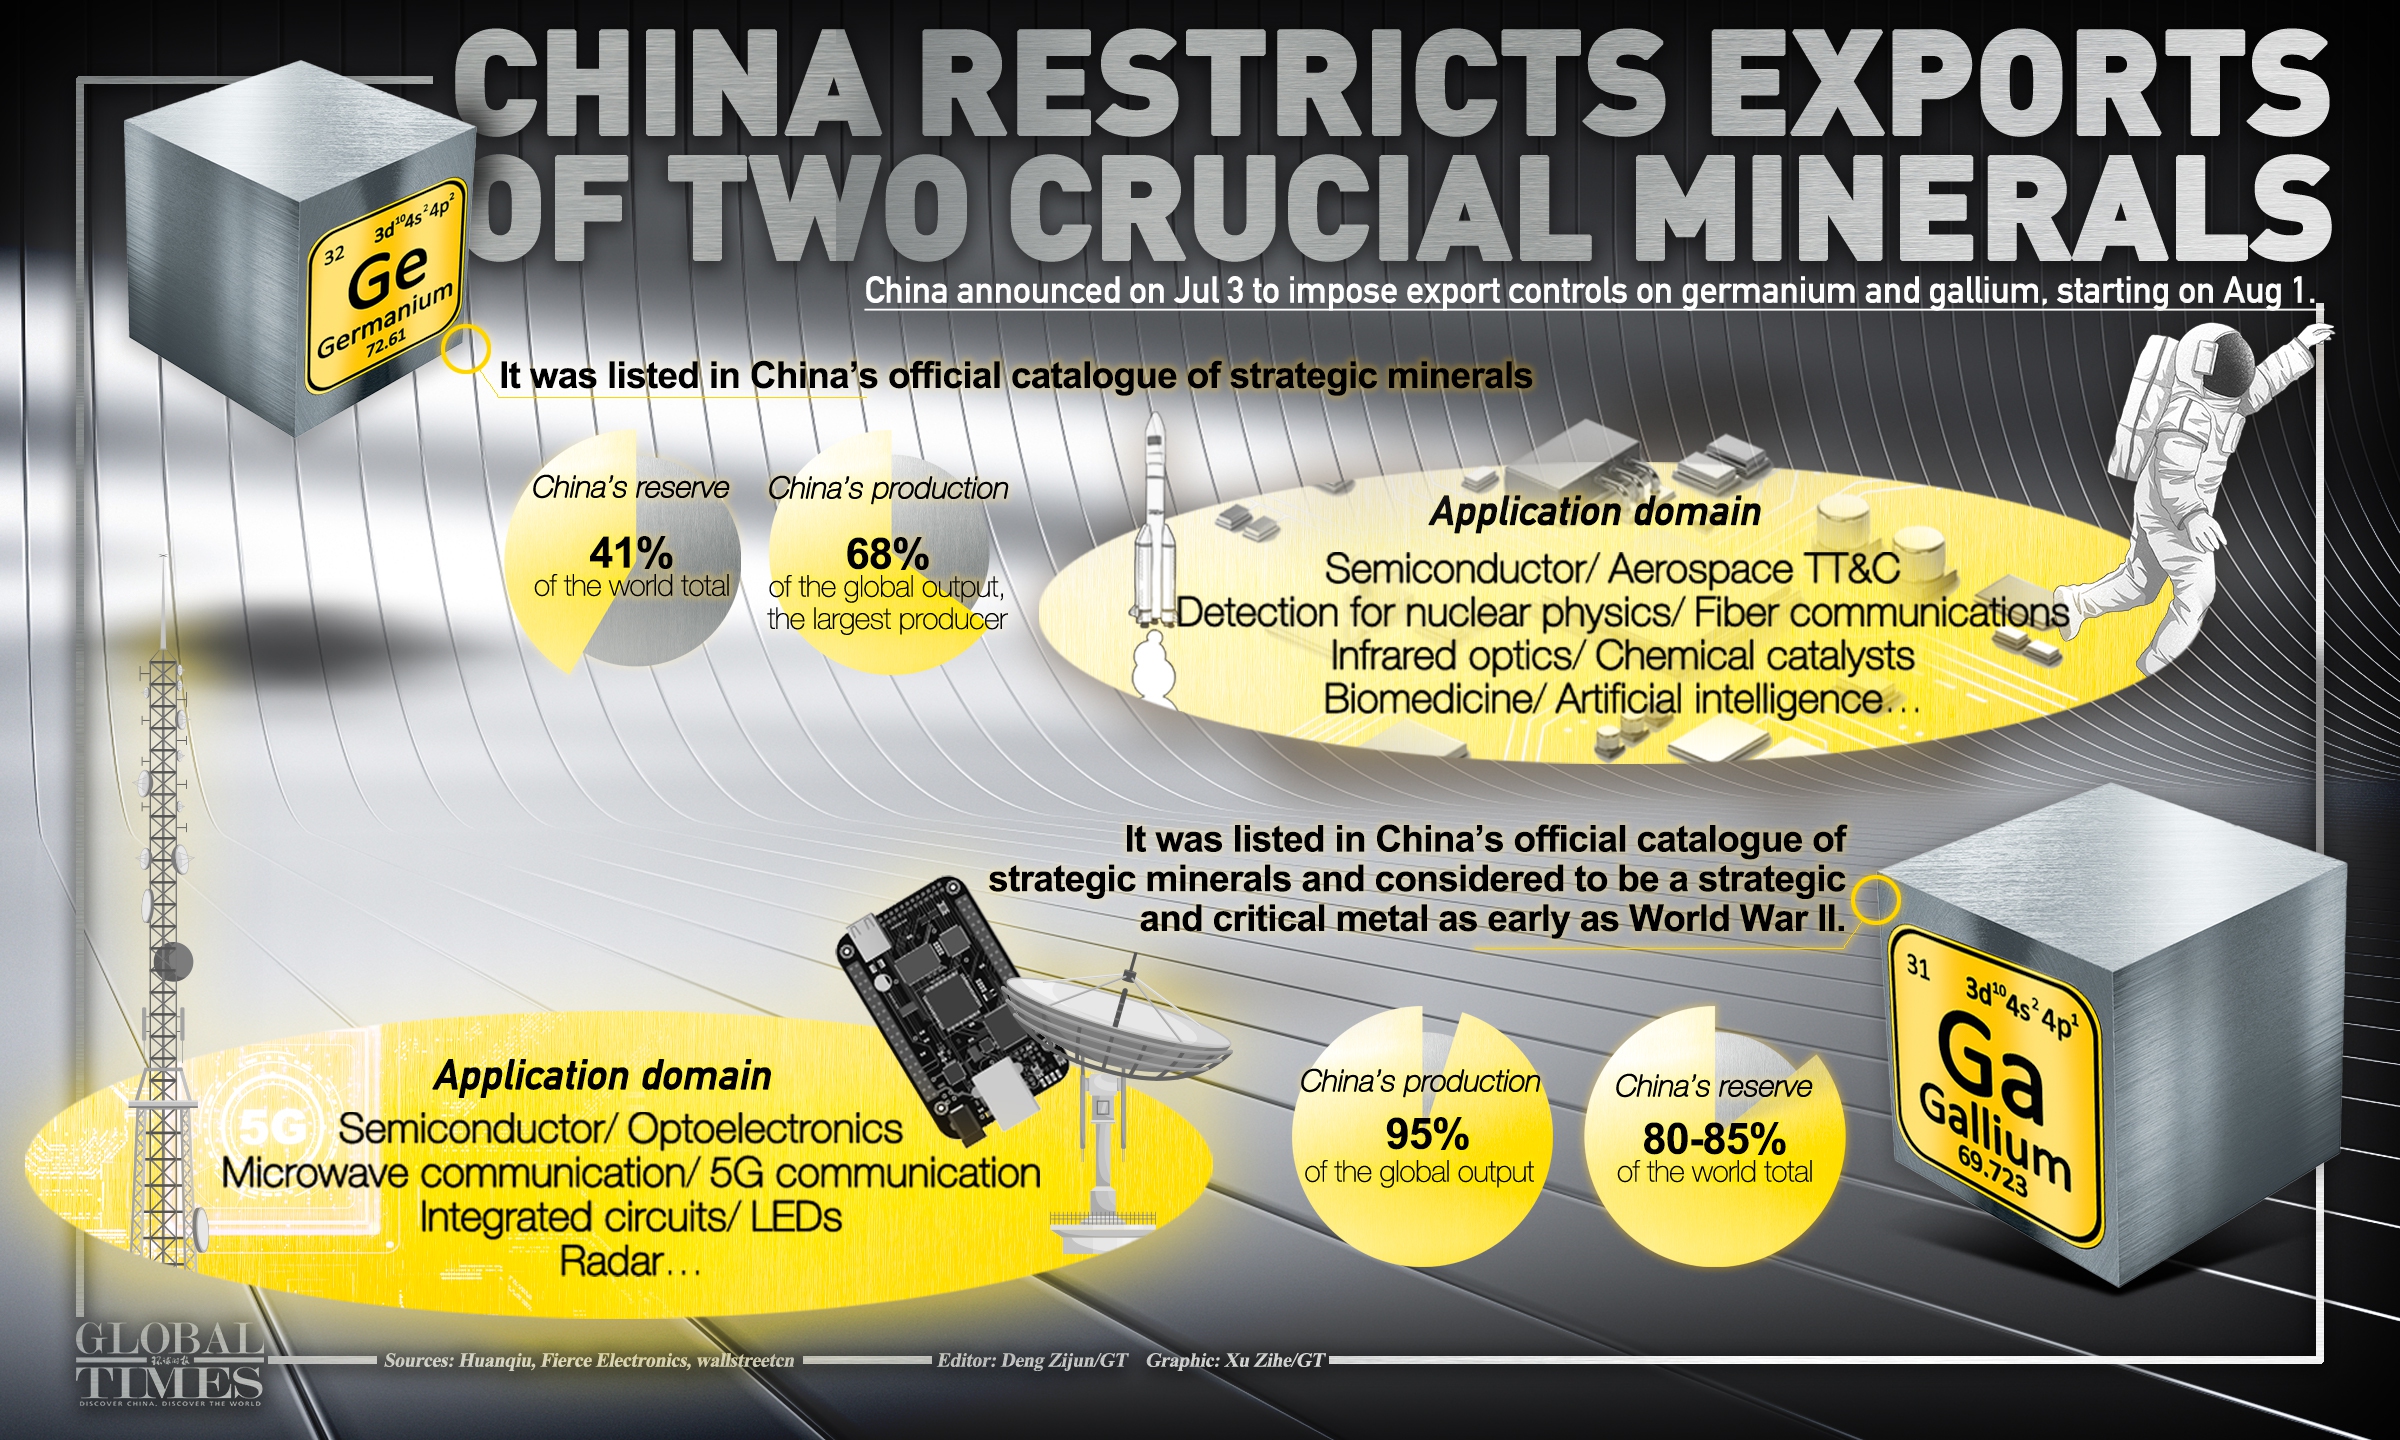 Why China’s export controls on #germanium and #gallium matter:
-China’s germanium reserve: 41% of the world total
-China’s germanium production: 68% of the global output	
-China’s gallium reserve: 80-85% of the world total
-China’s production: 95% of the global output
